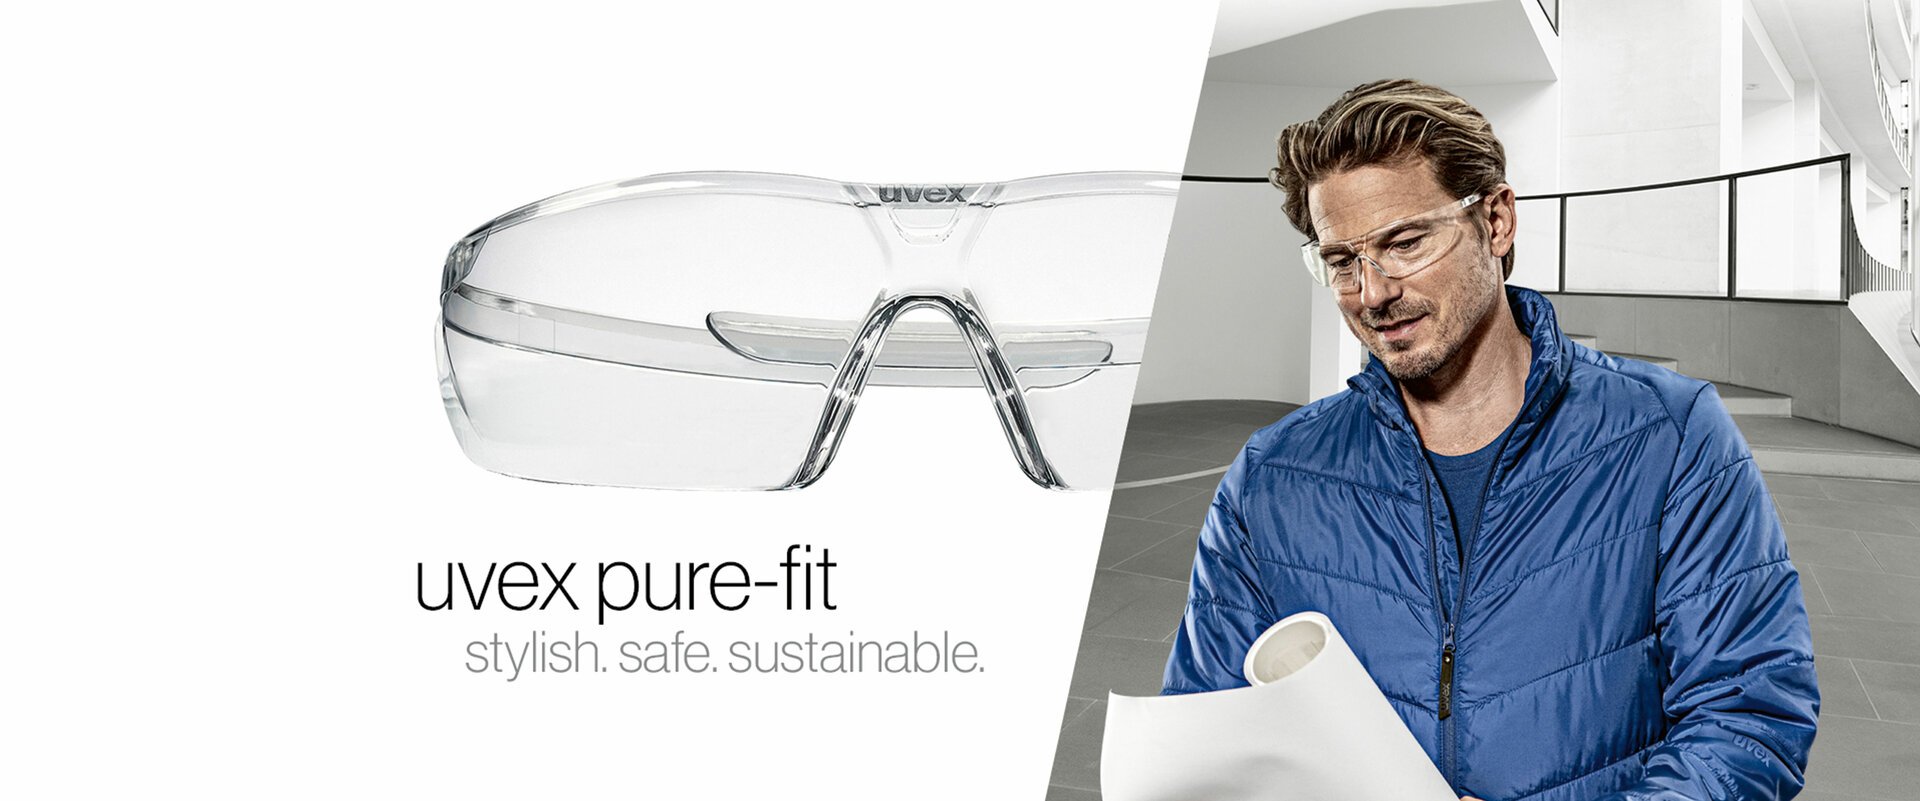 uvex pure-fit safety glasses | uvex safety